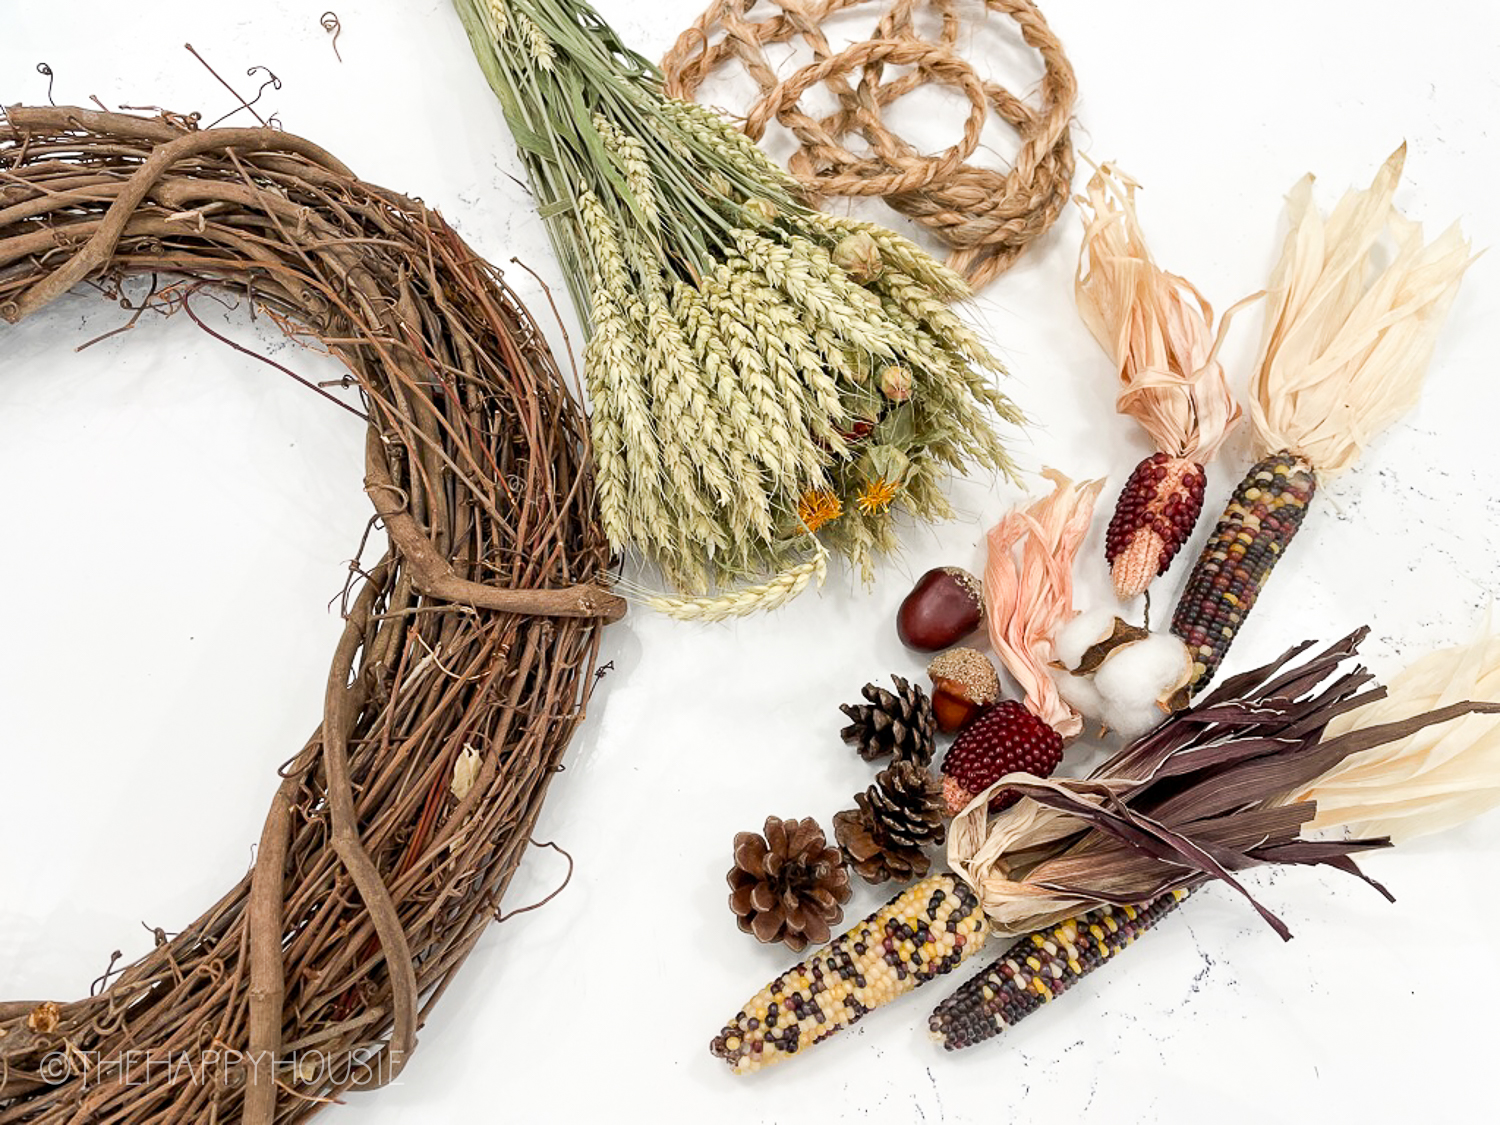 Dried corn, what grass, a wreath and twine.